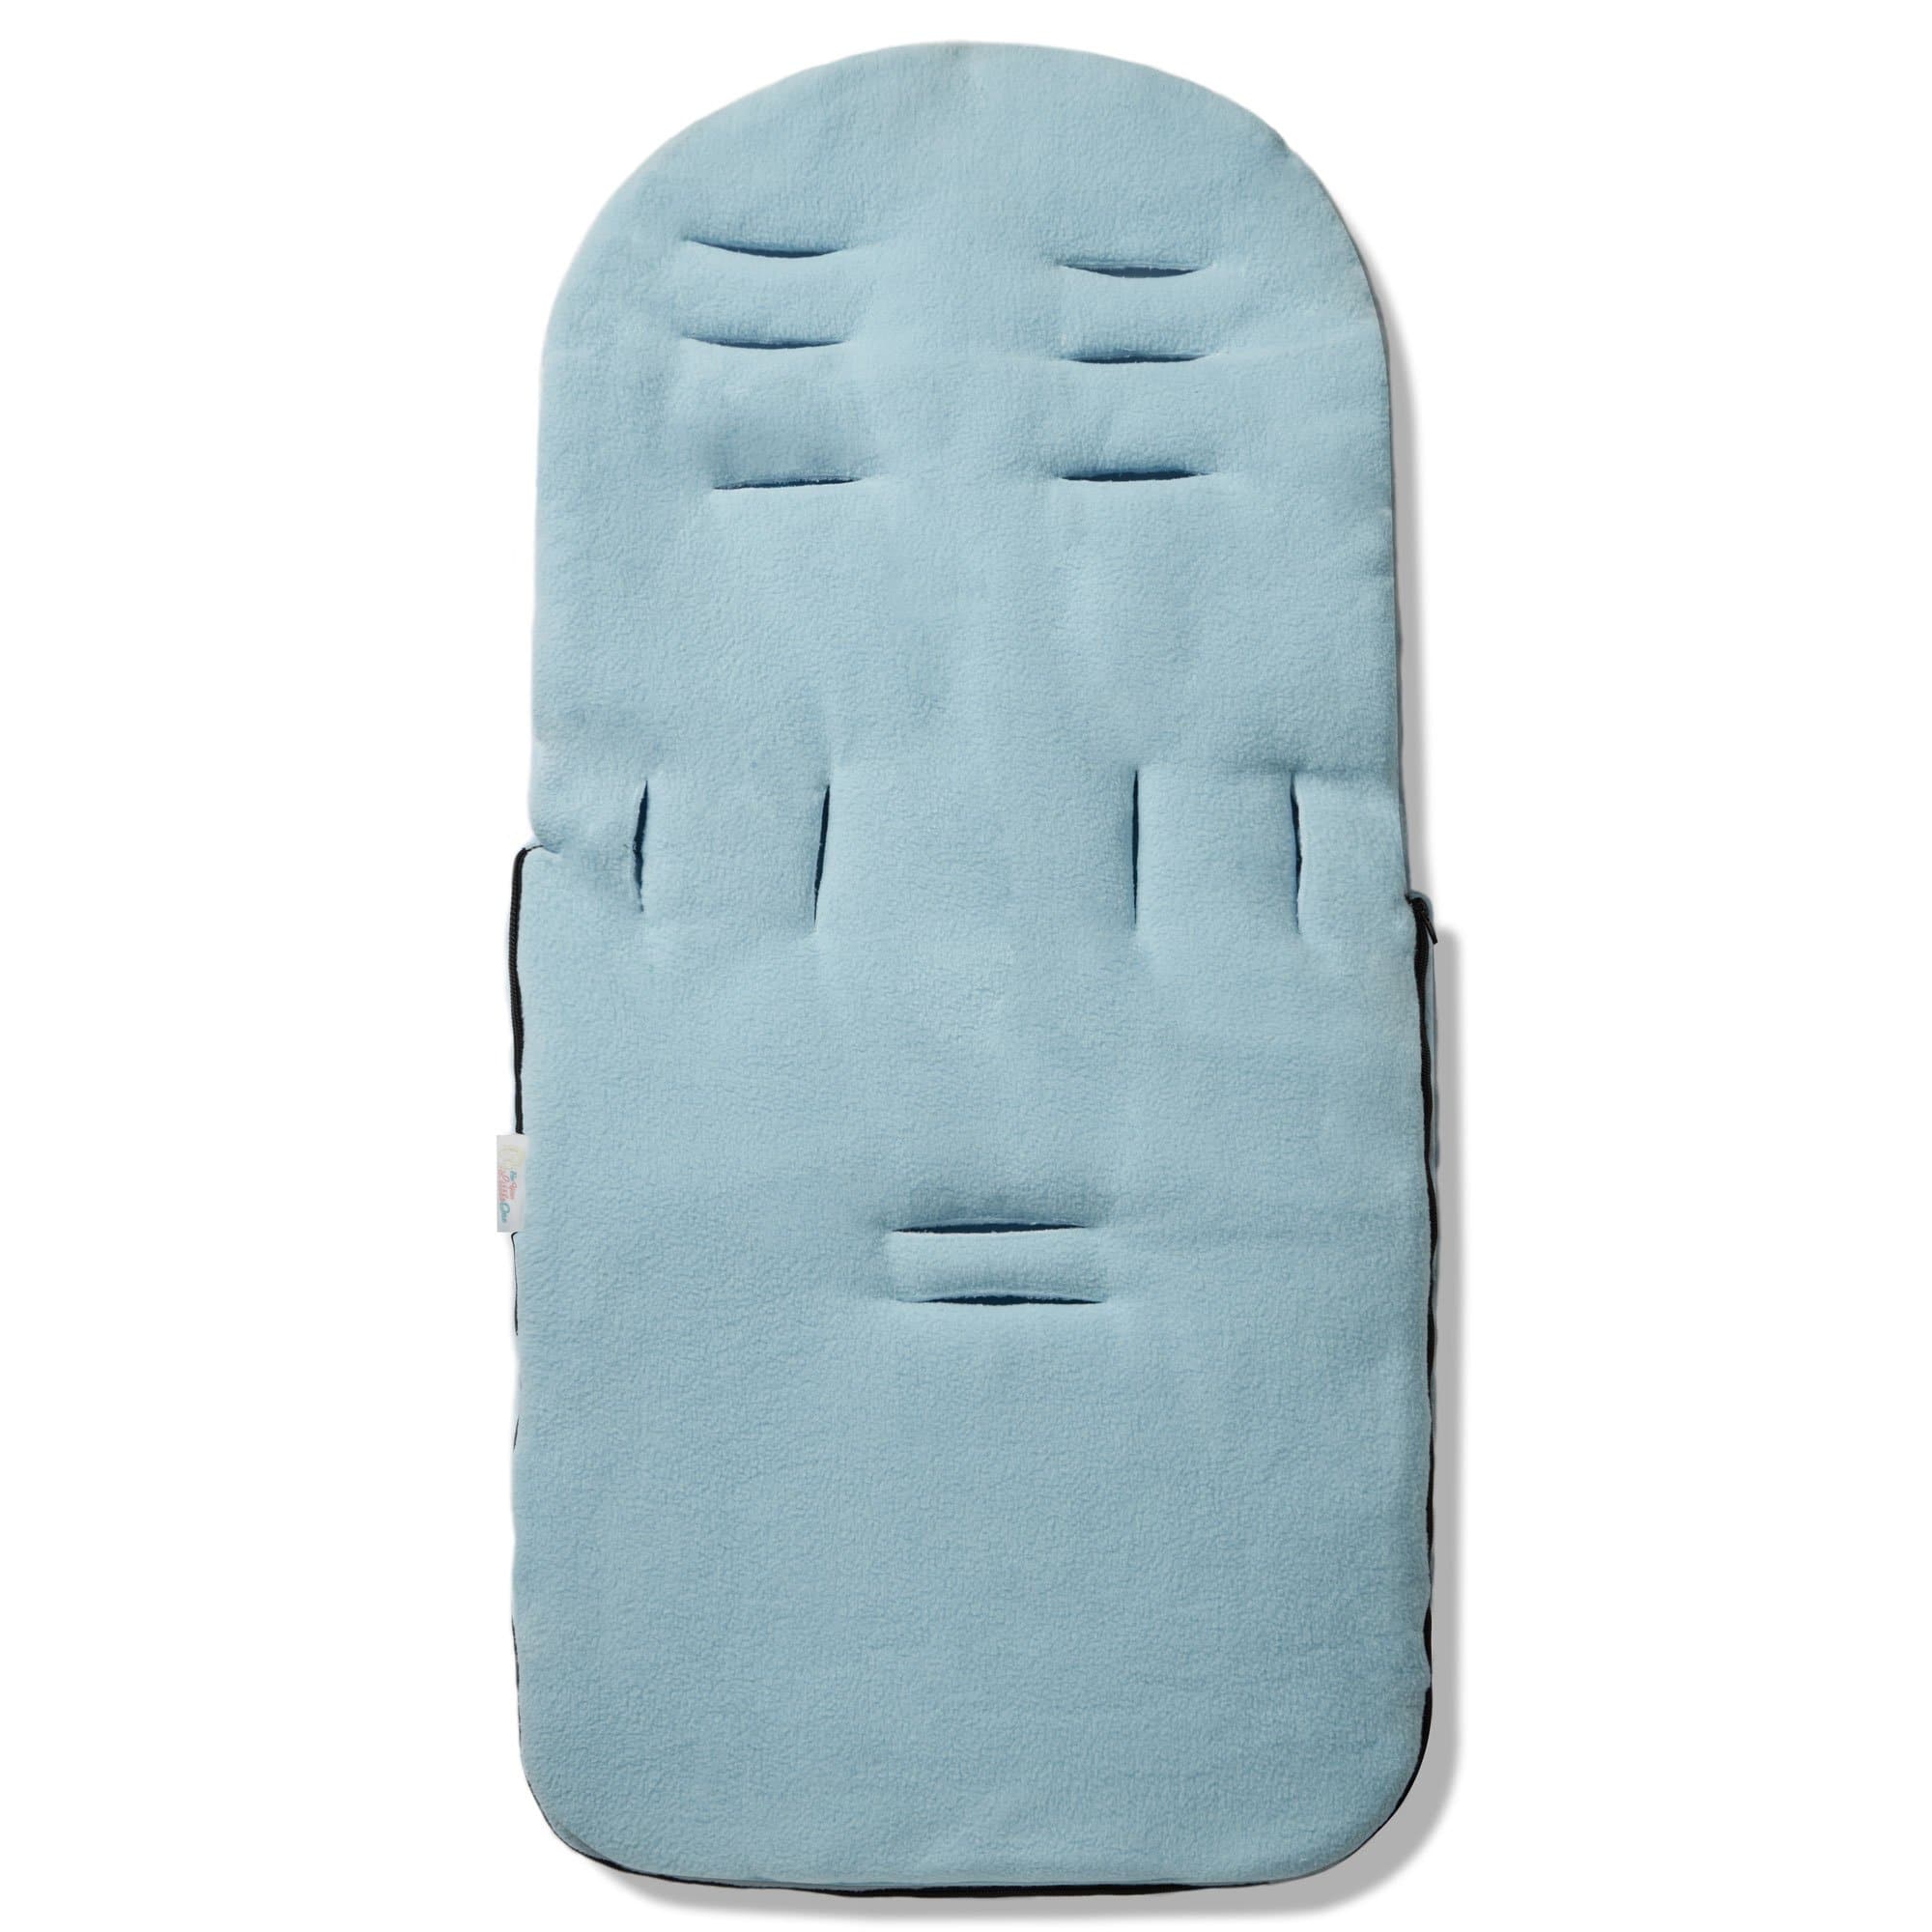 Dimple Footmuff / Cosy Toes Compatible with Quinny - For Your Little One